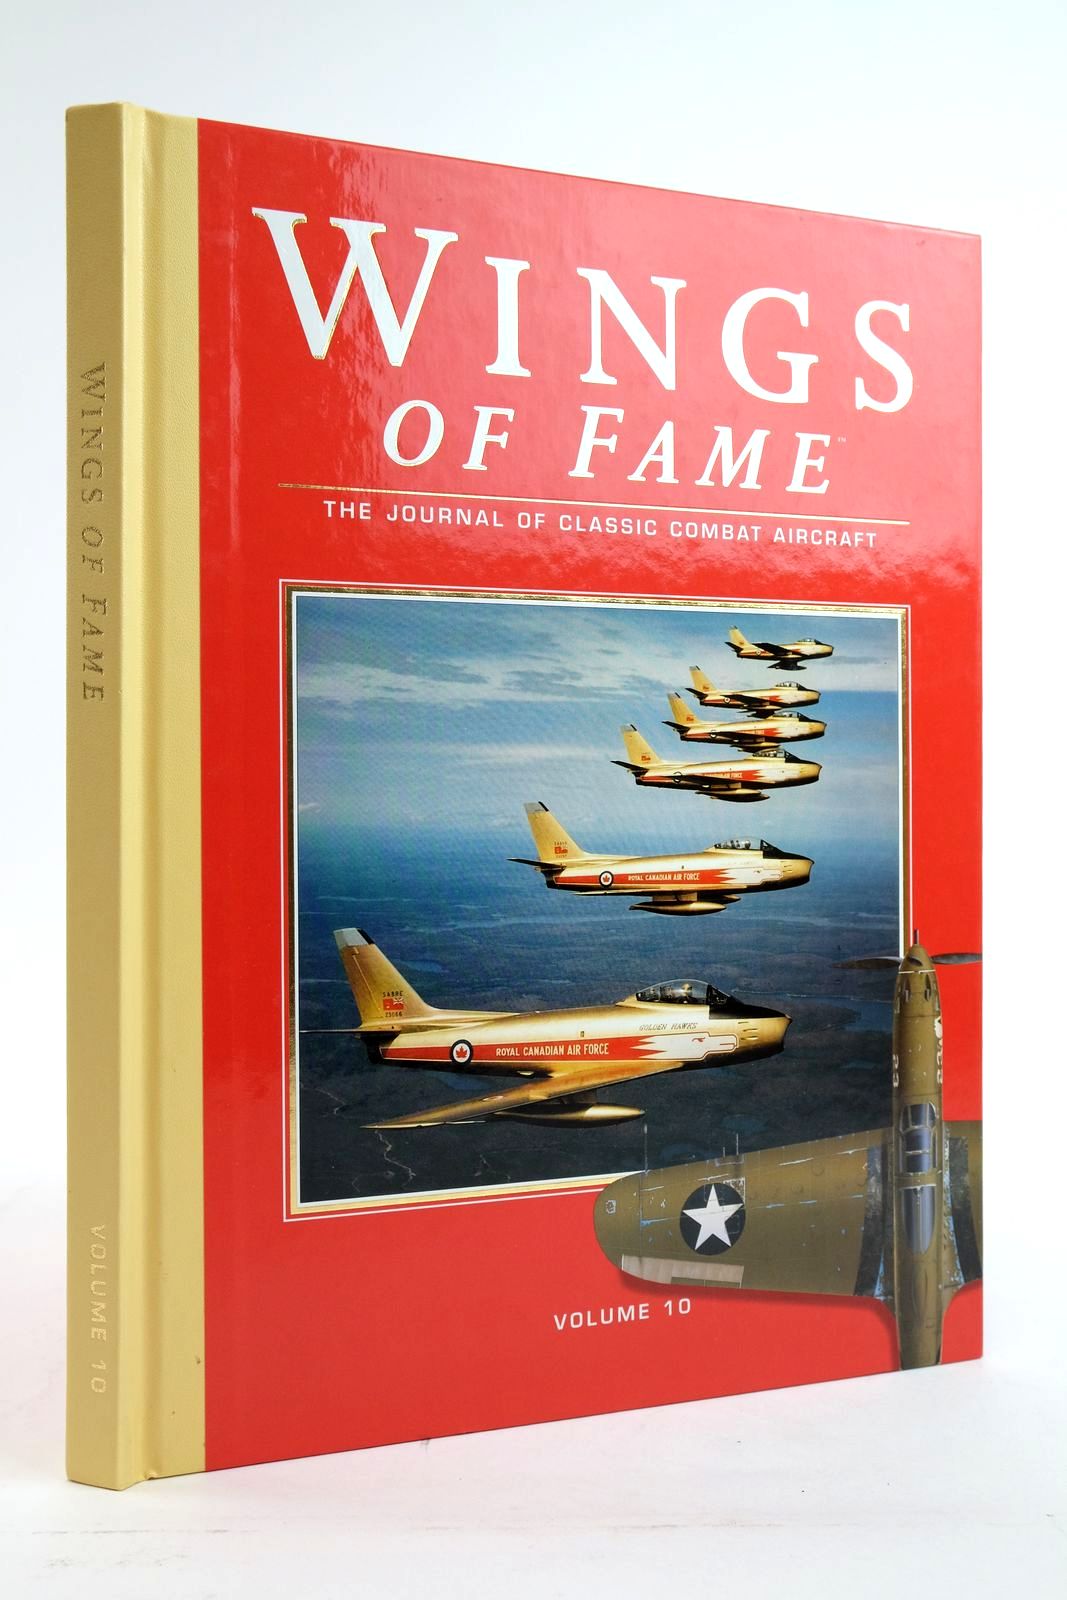 Photo of WINGS OF FAME VOLUME 10 published by Aerospace (STOCK CODE: 2135118)  for sale by Stella & Rose's Books